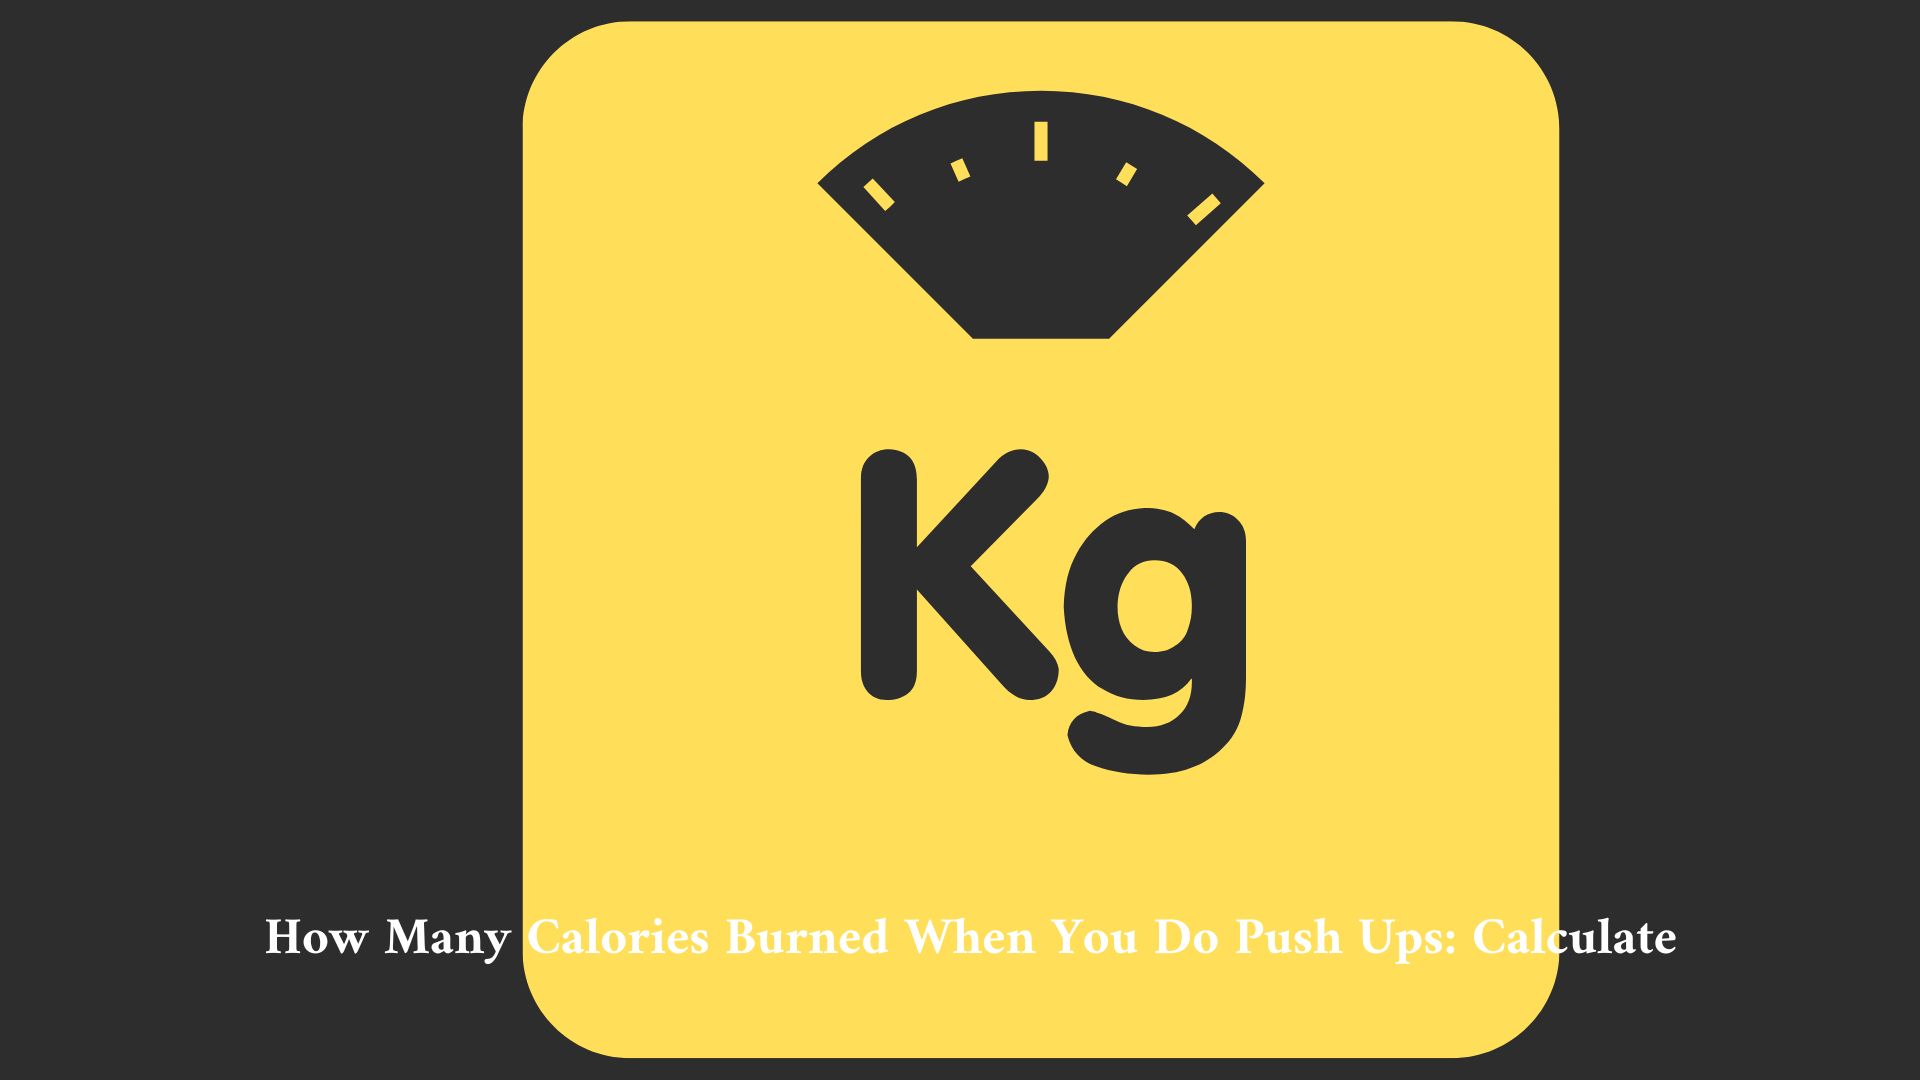 How Many Calories Burned When You Do Push Ups: Calculate